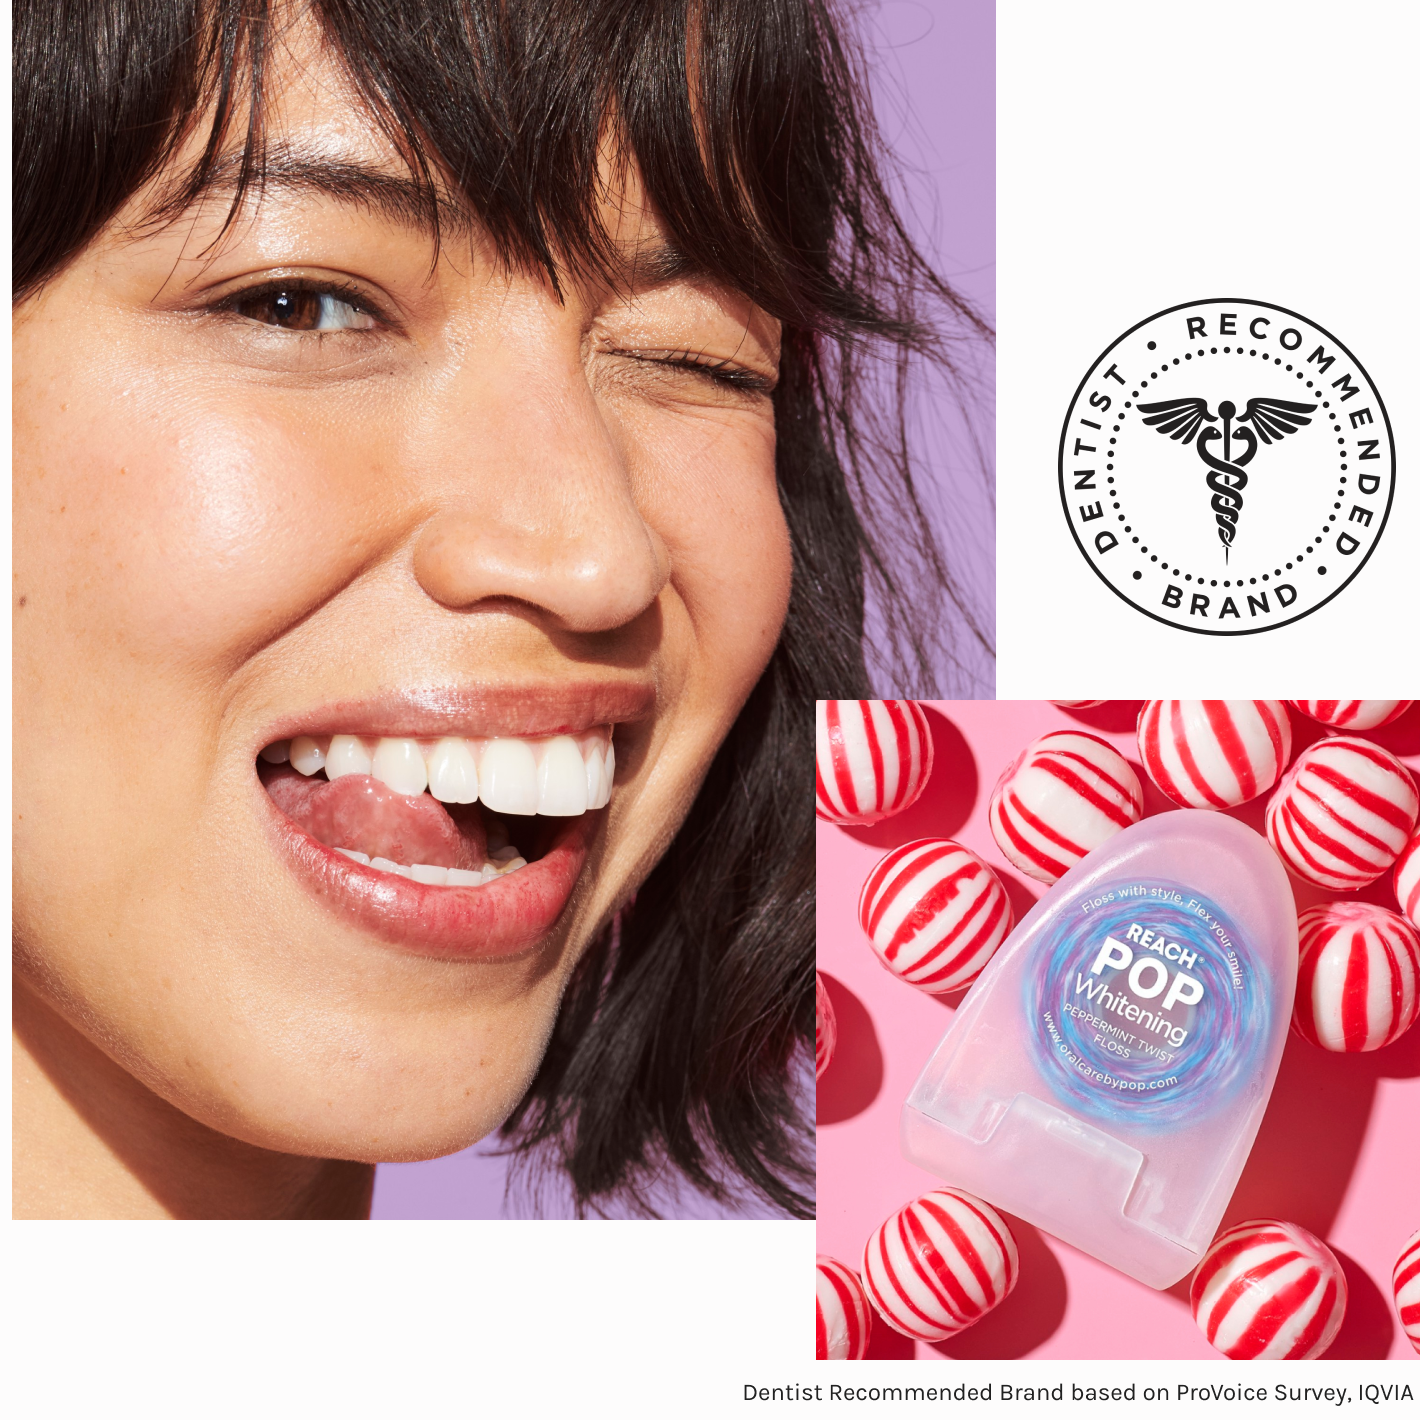 A model smiling and winking at the viewer, showing her teeth perfectly white and clean and shiny, overlayed by an image of a box of Reach POP Peppermint Whitening Floss lying around a bunch of candies, and a stamp "Dentist Recommended Brand" stamp.